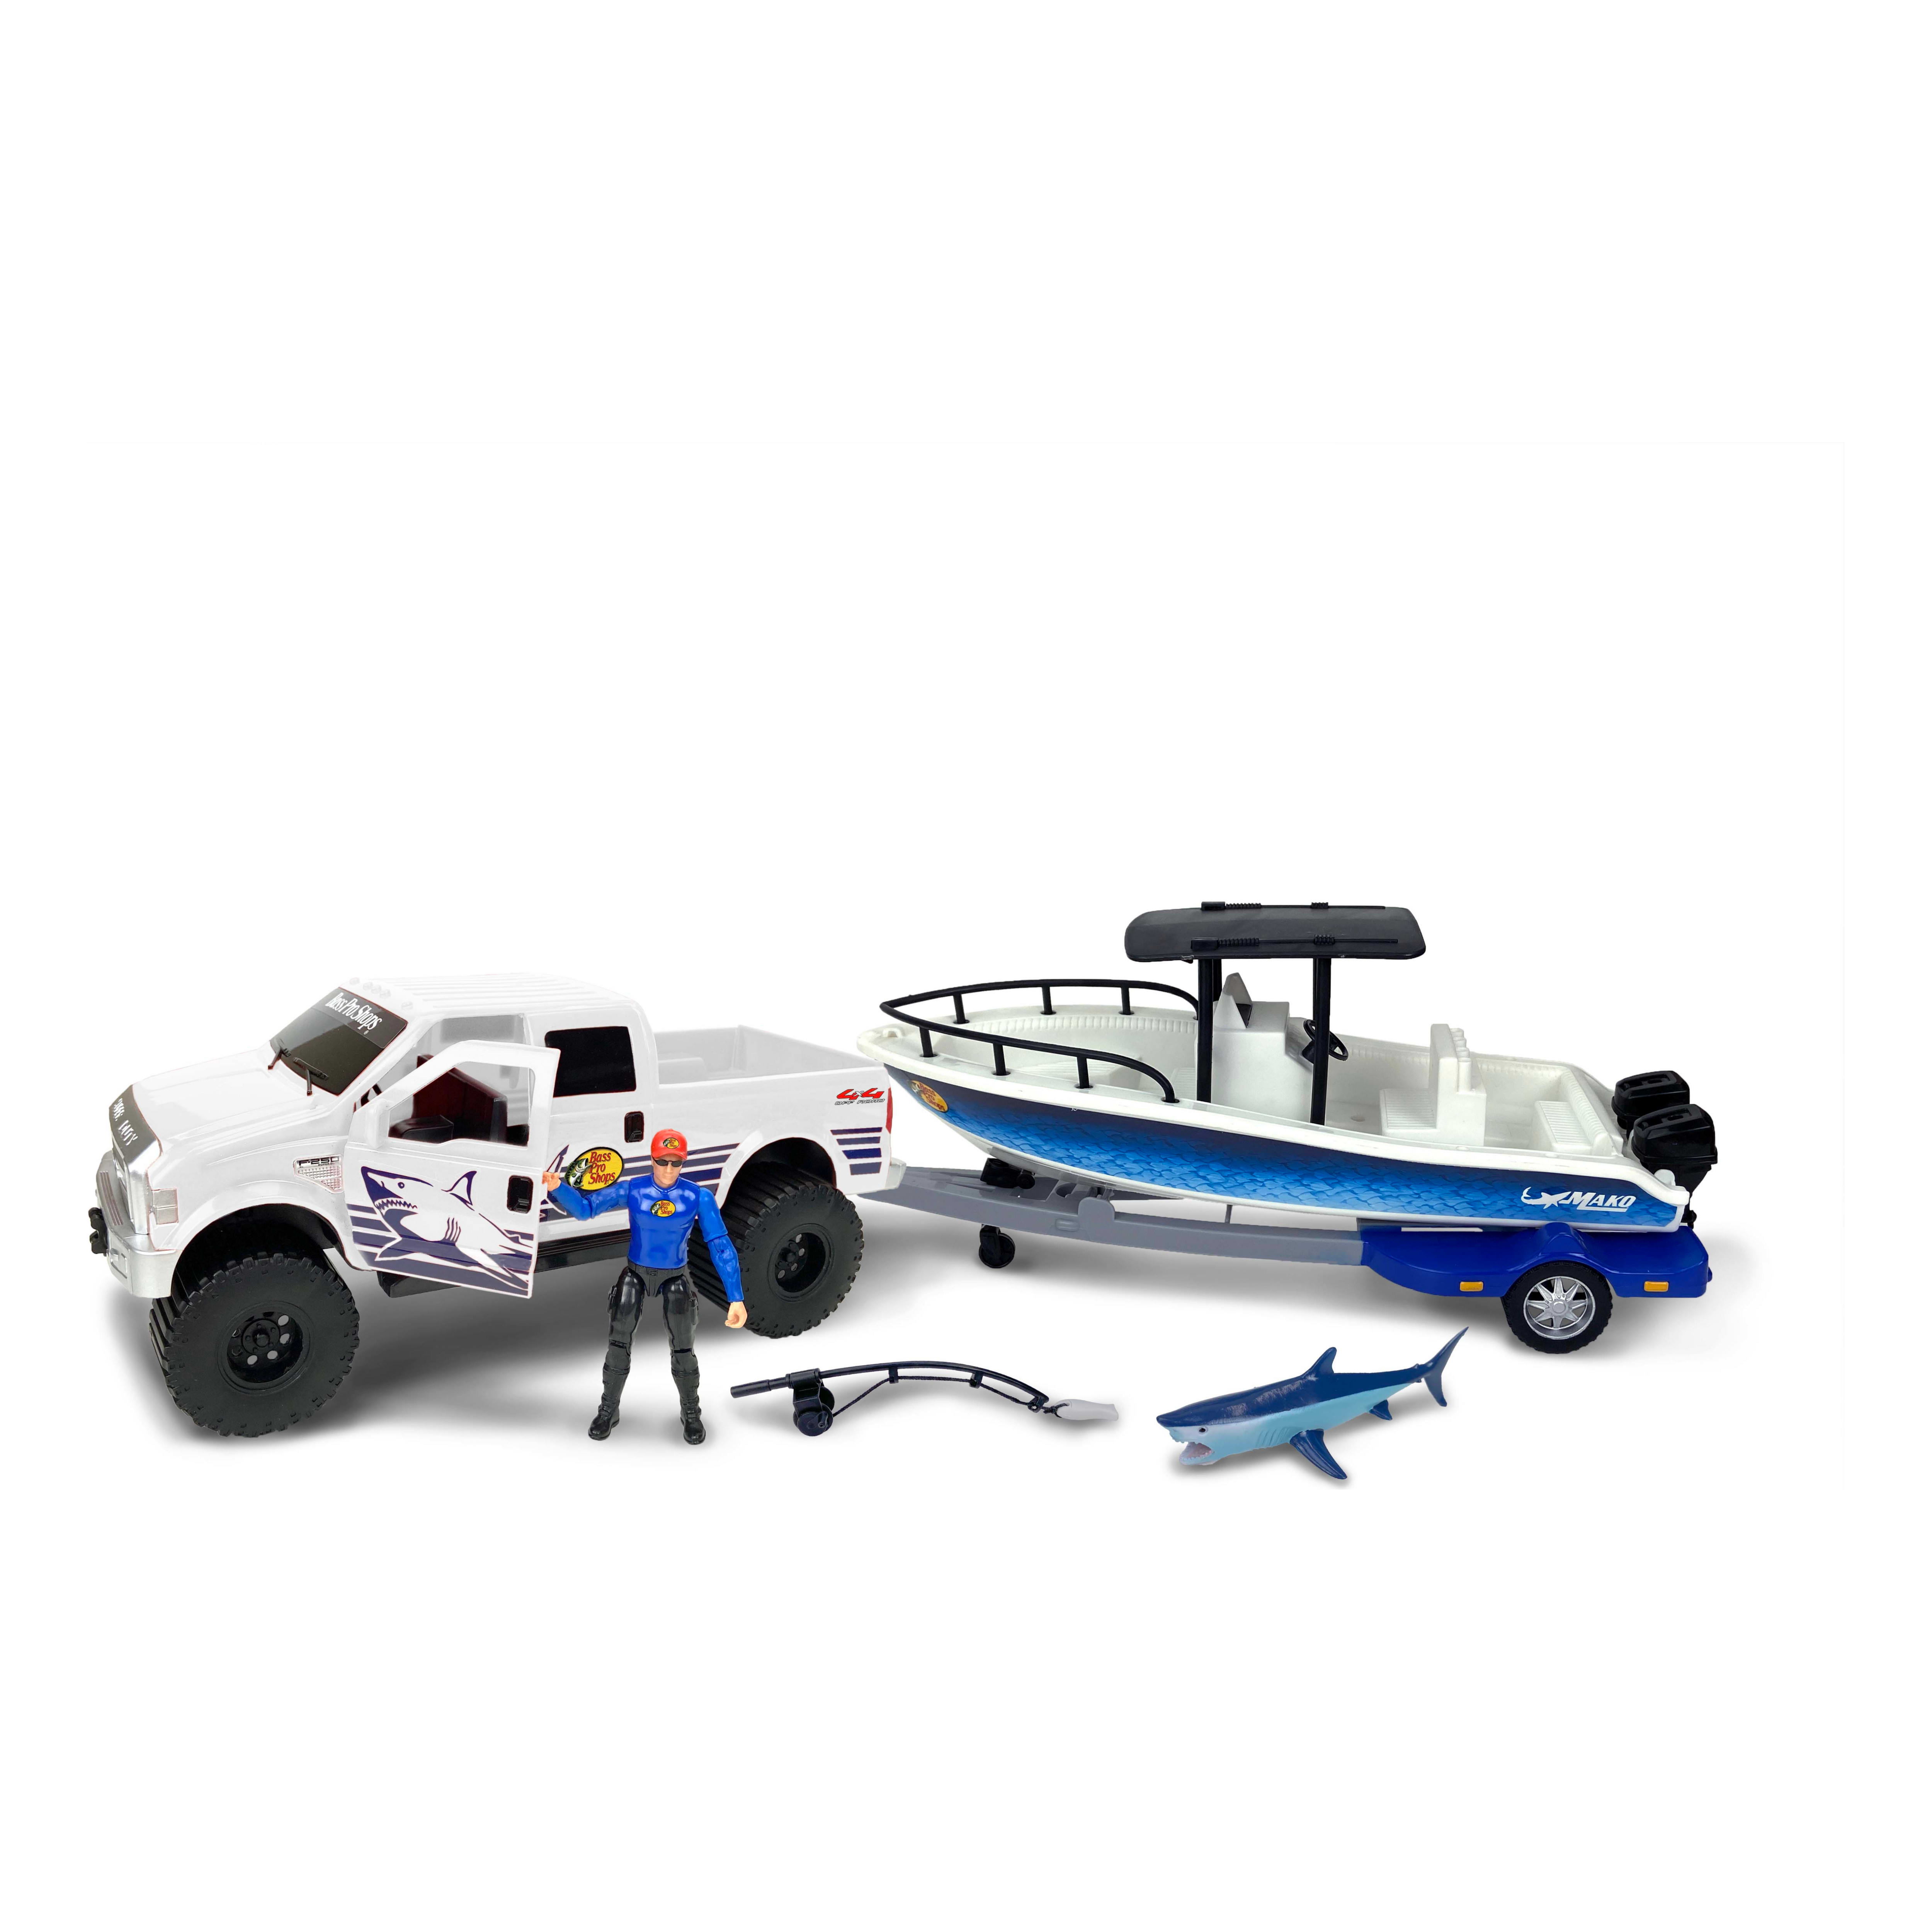 MAKO® Boats at Bass Pro and Cabela's Boating Centers